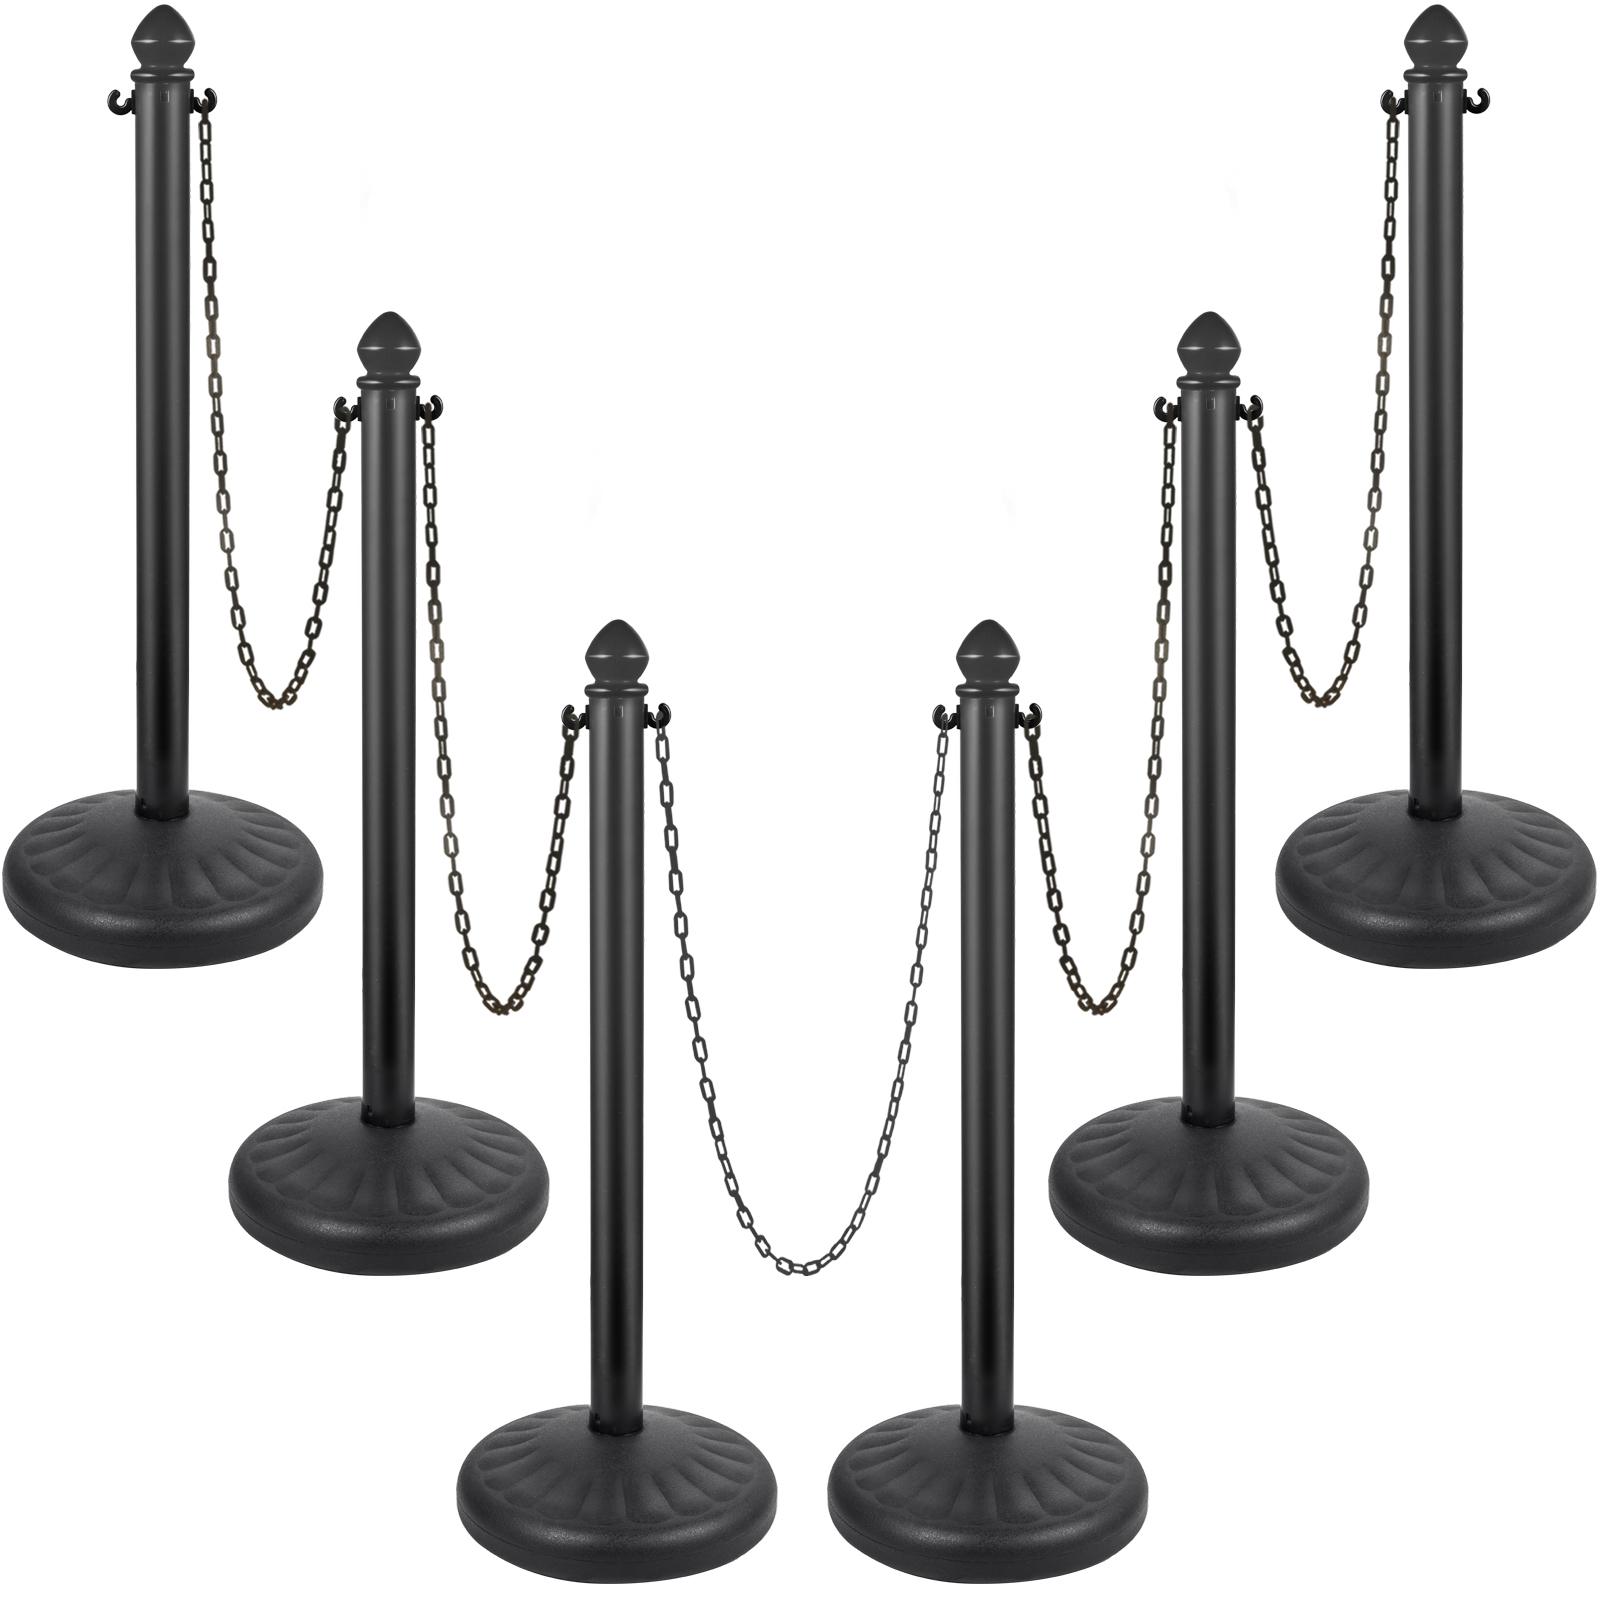 Vevor Plastic Stanchion Chain Stanchion 6pcs Outdoor Stanchion W/ 6x39in Chains от Vevor Many GEOs